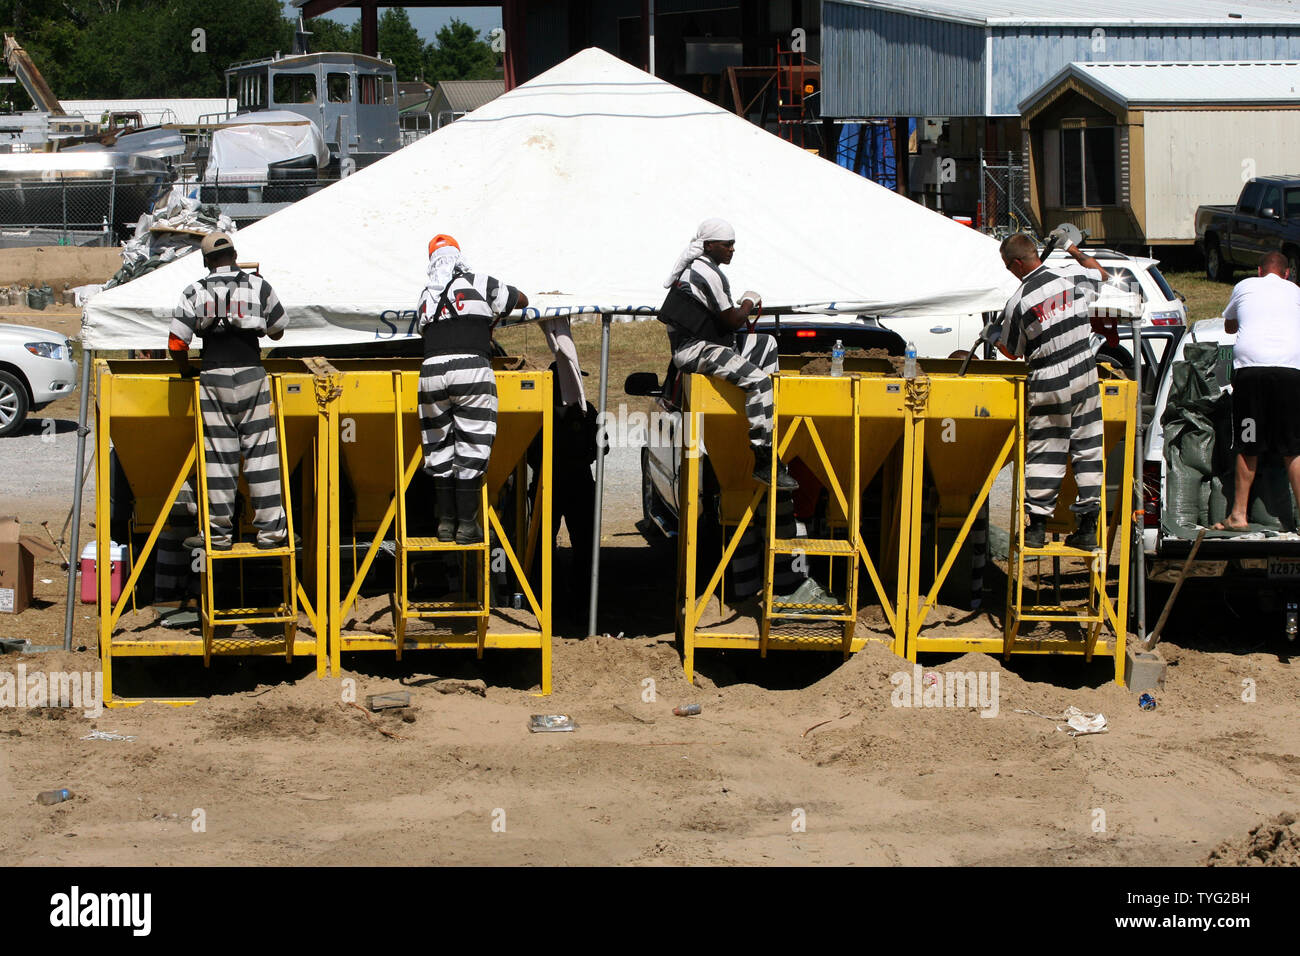 Prison inmates fill sandbags in Stephensville, Louisiana, May 14, 2011. St.  Mary Parish was preparing for high water after the U.S. Army Corps of Engineers opened the Morganza Floodway to divert water from the cresting Mississippi River away from downriver cities including Baton Rouge and New Orleans.    UPI/A.J. Sisco. Stock Photo